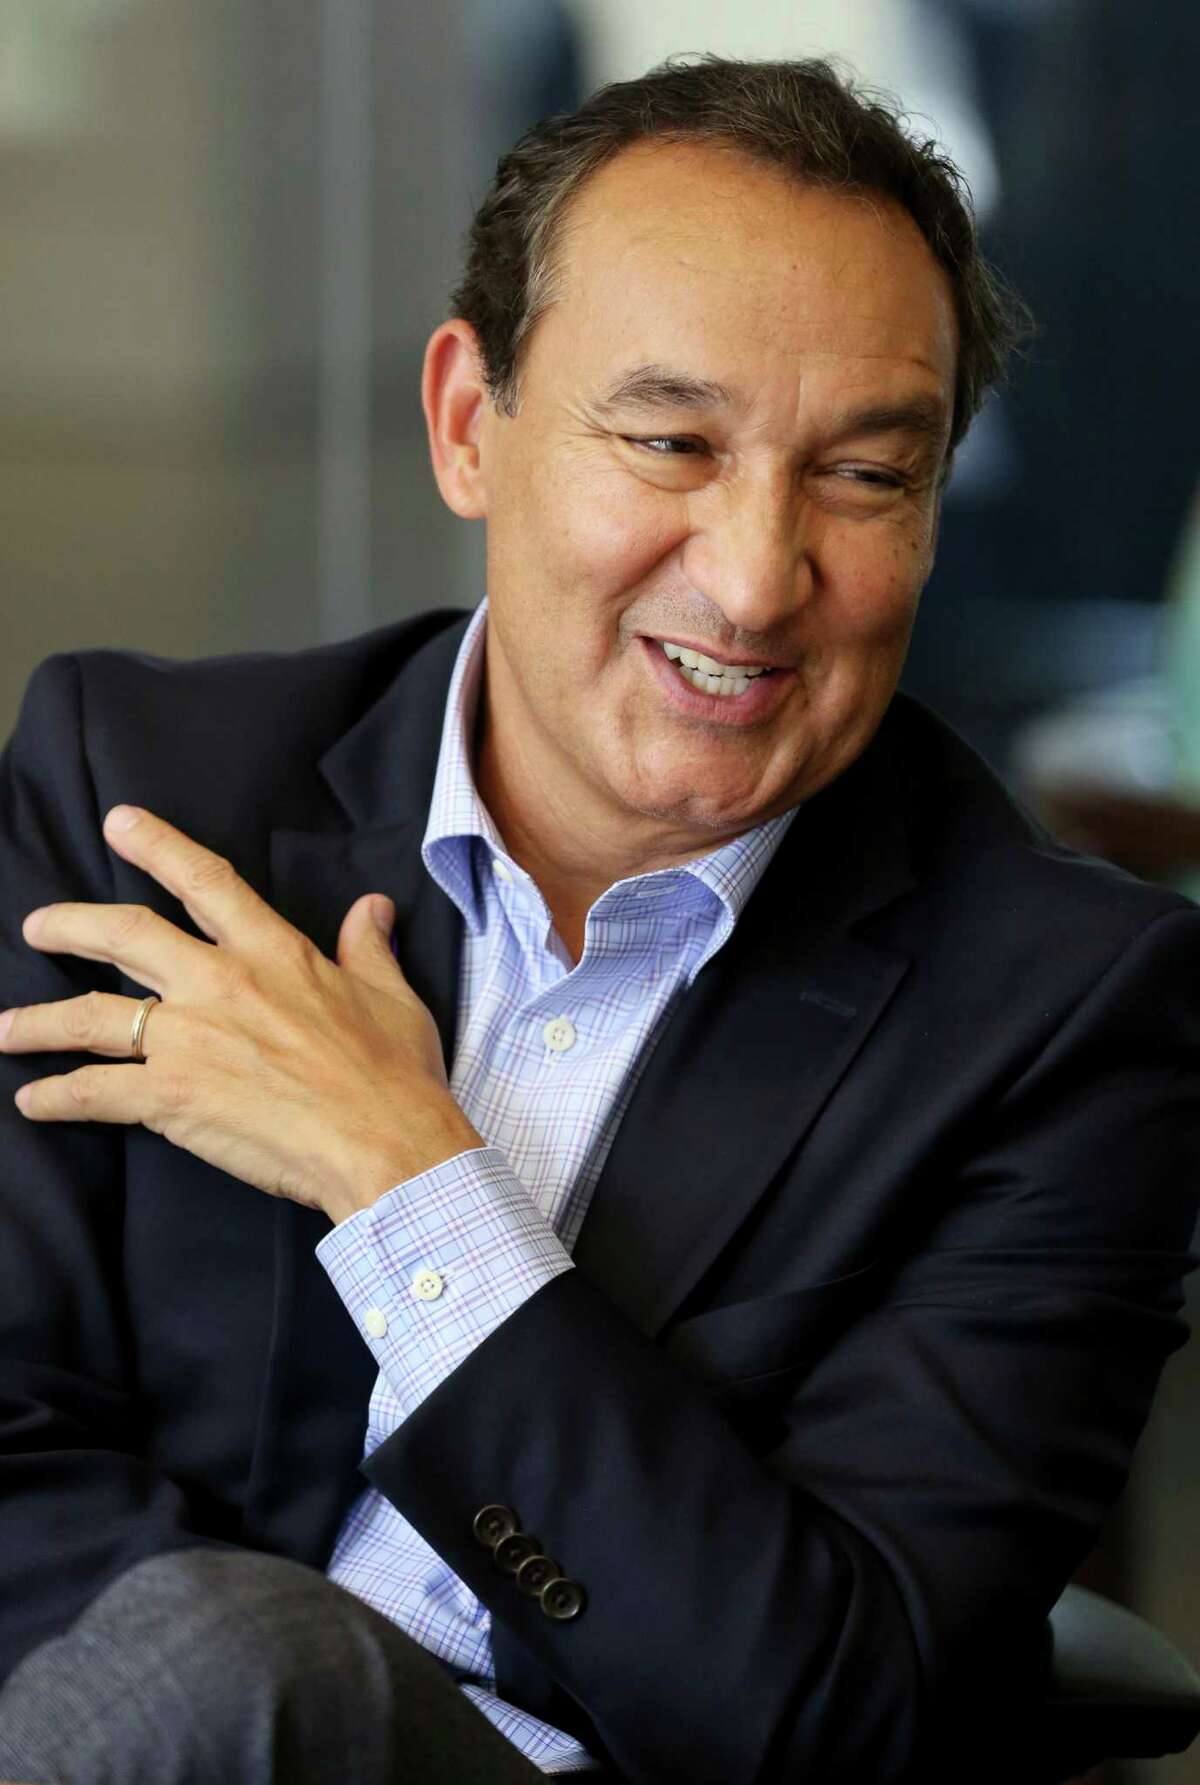 United Airlines CEO Oscar Munoz speaks during an editorial board meeting at the Houston Chronicle Thursday, Oct. 20, 2016, in Houston. (Yi-Chin Lee / Houston Chronicle )